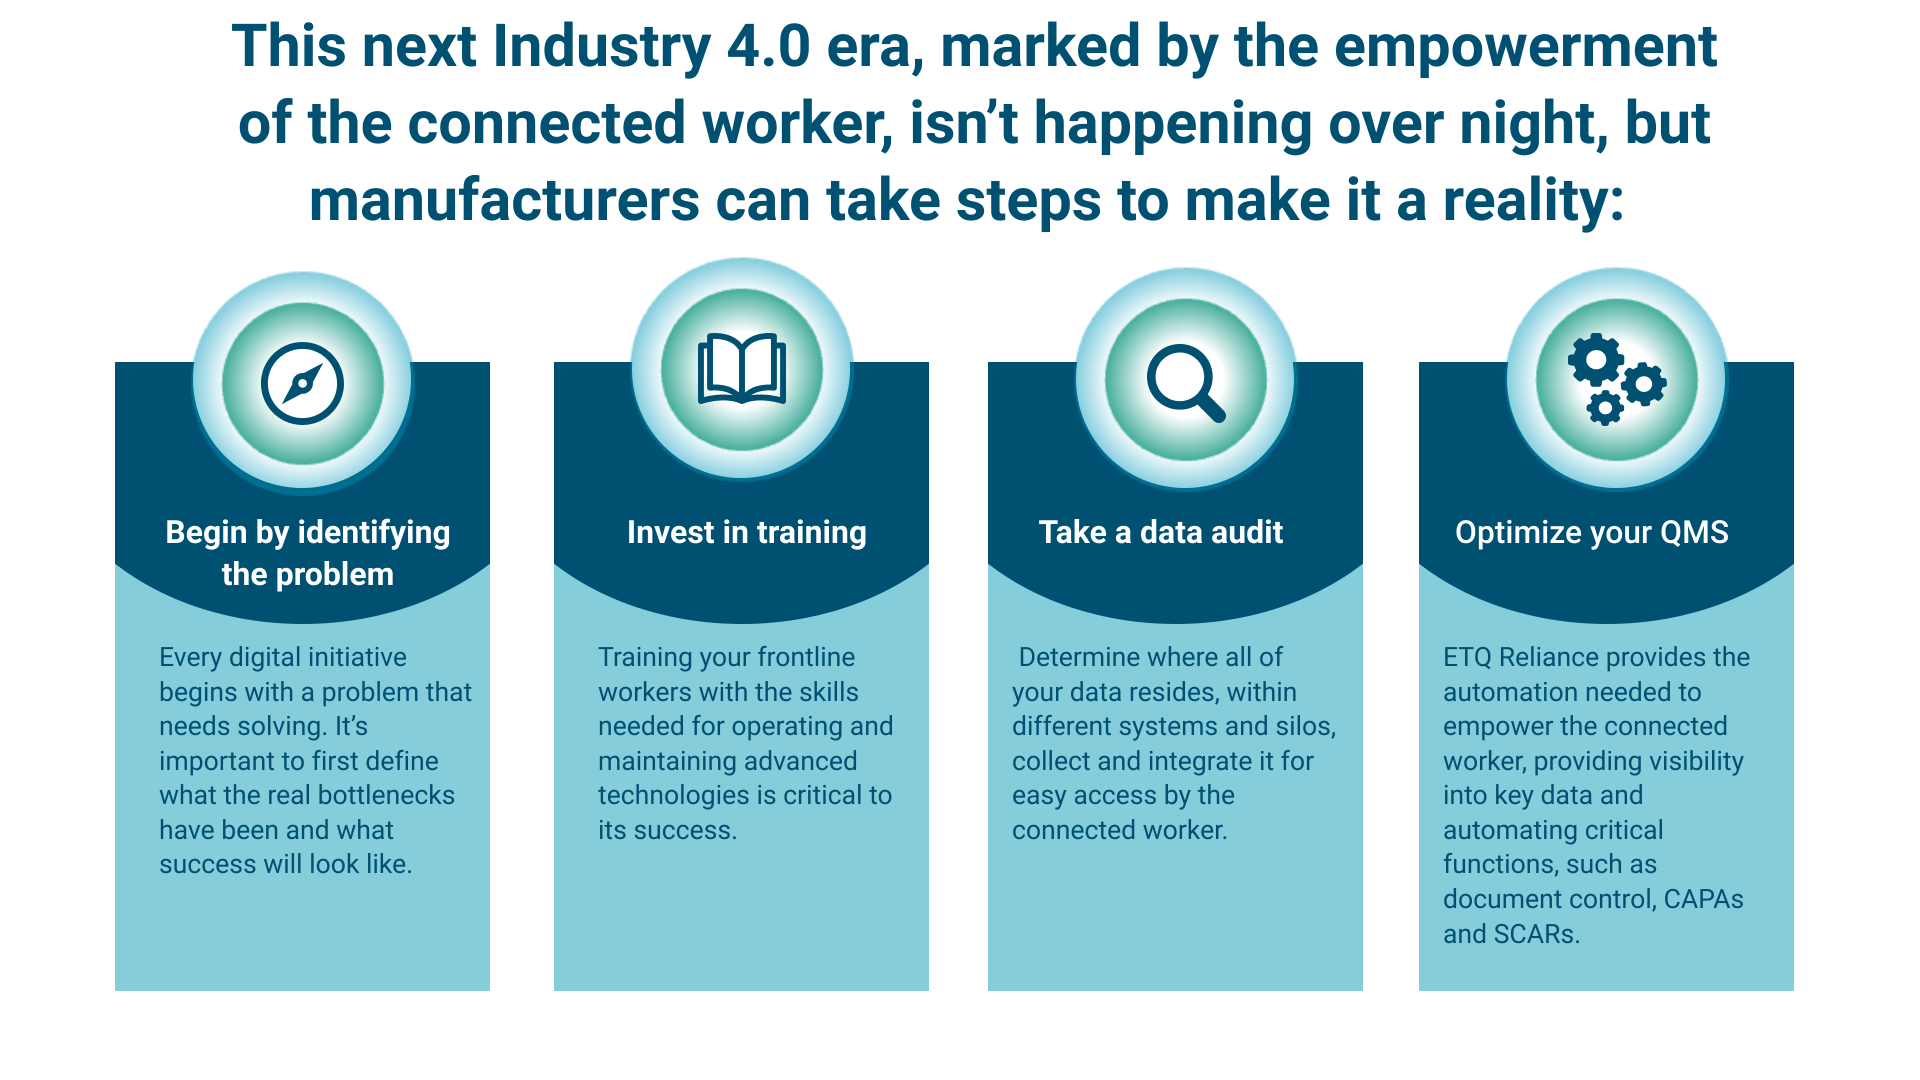 Steps to make industry 4.0 a reality